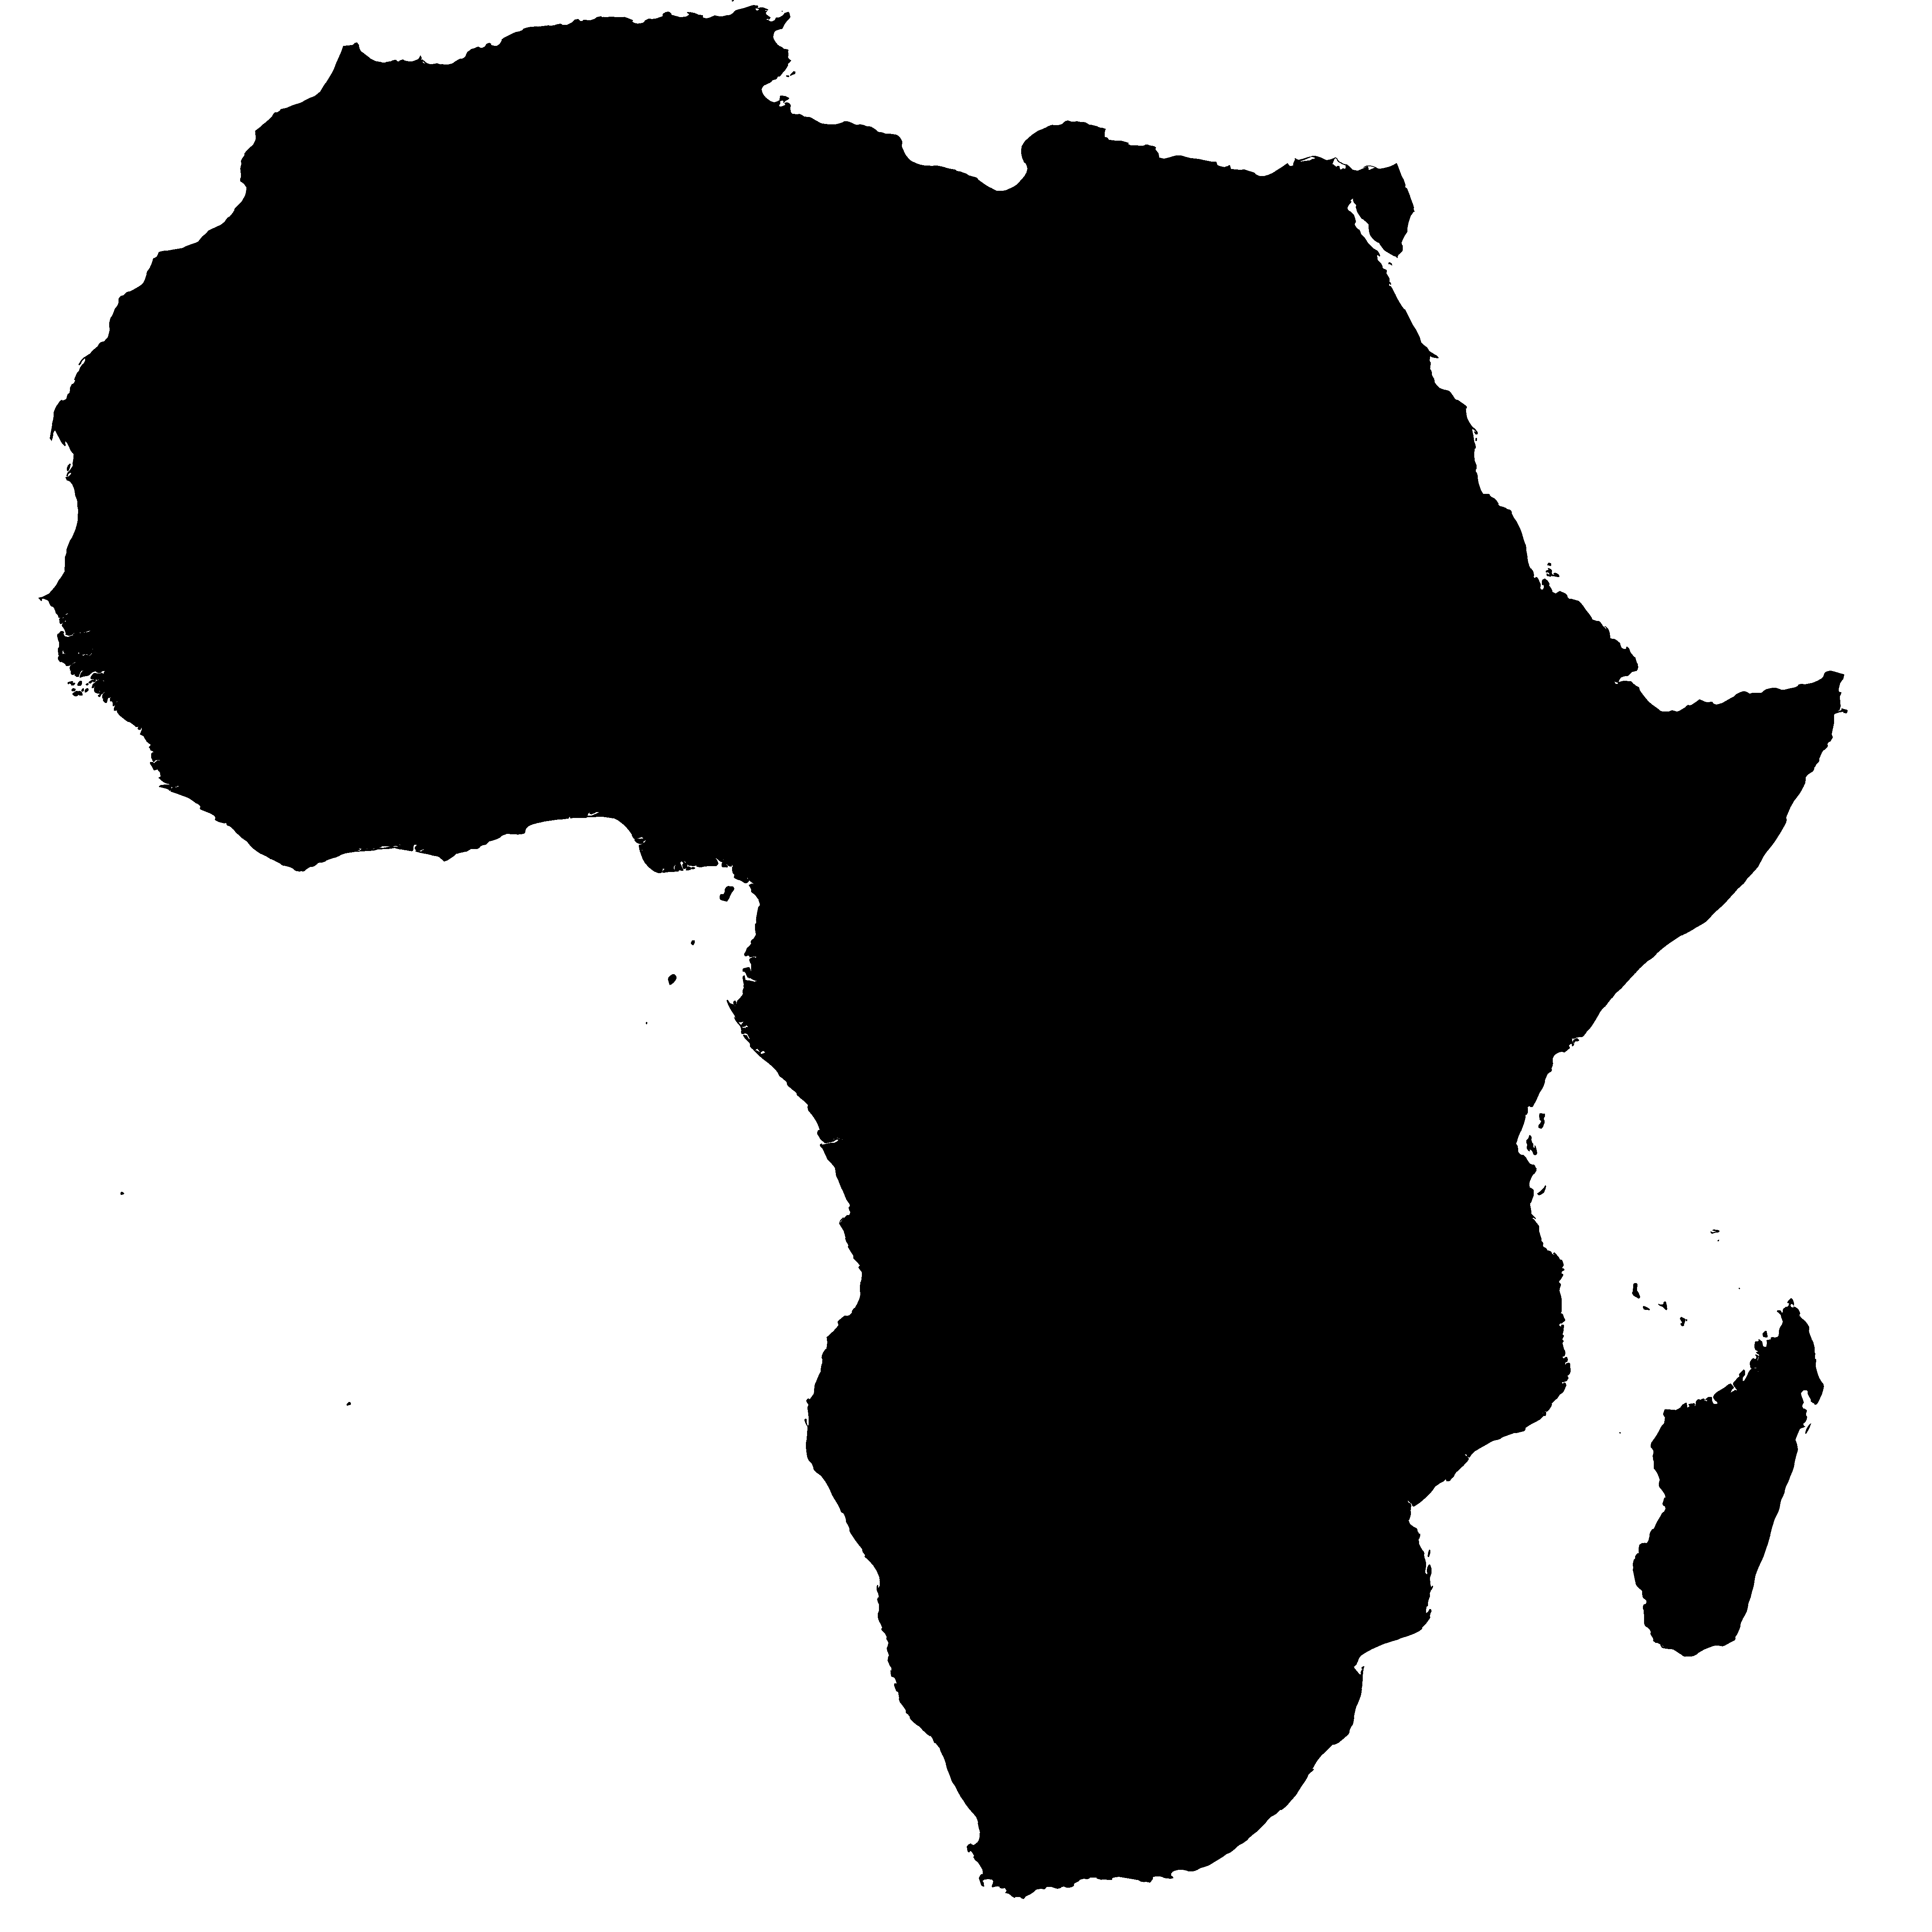 Africa clipart continent africa. Map computer icons png